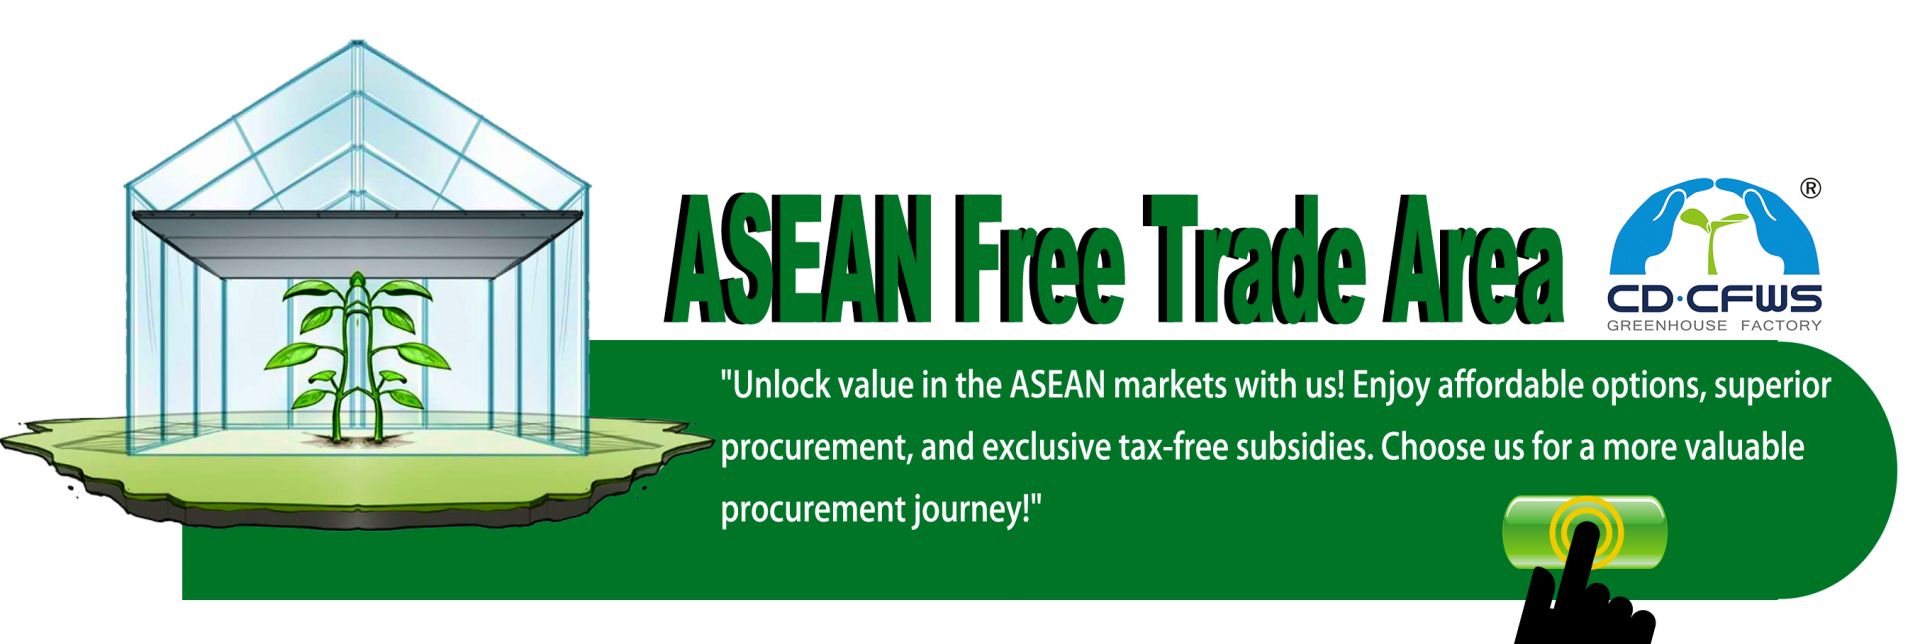 ASEAN tax exemption policy